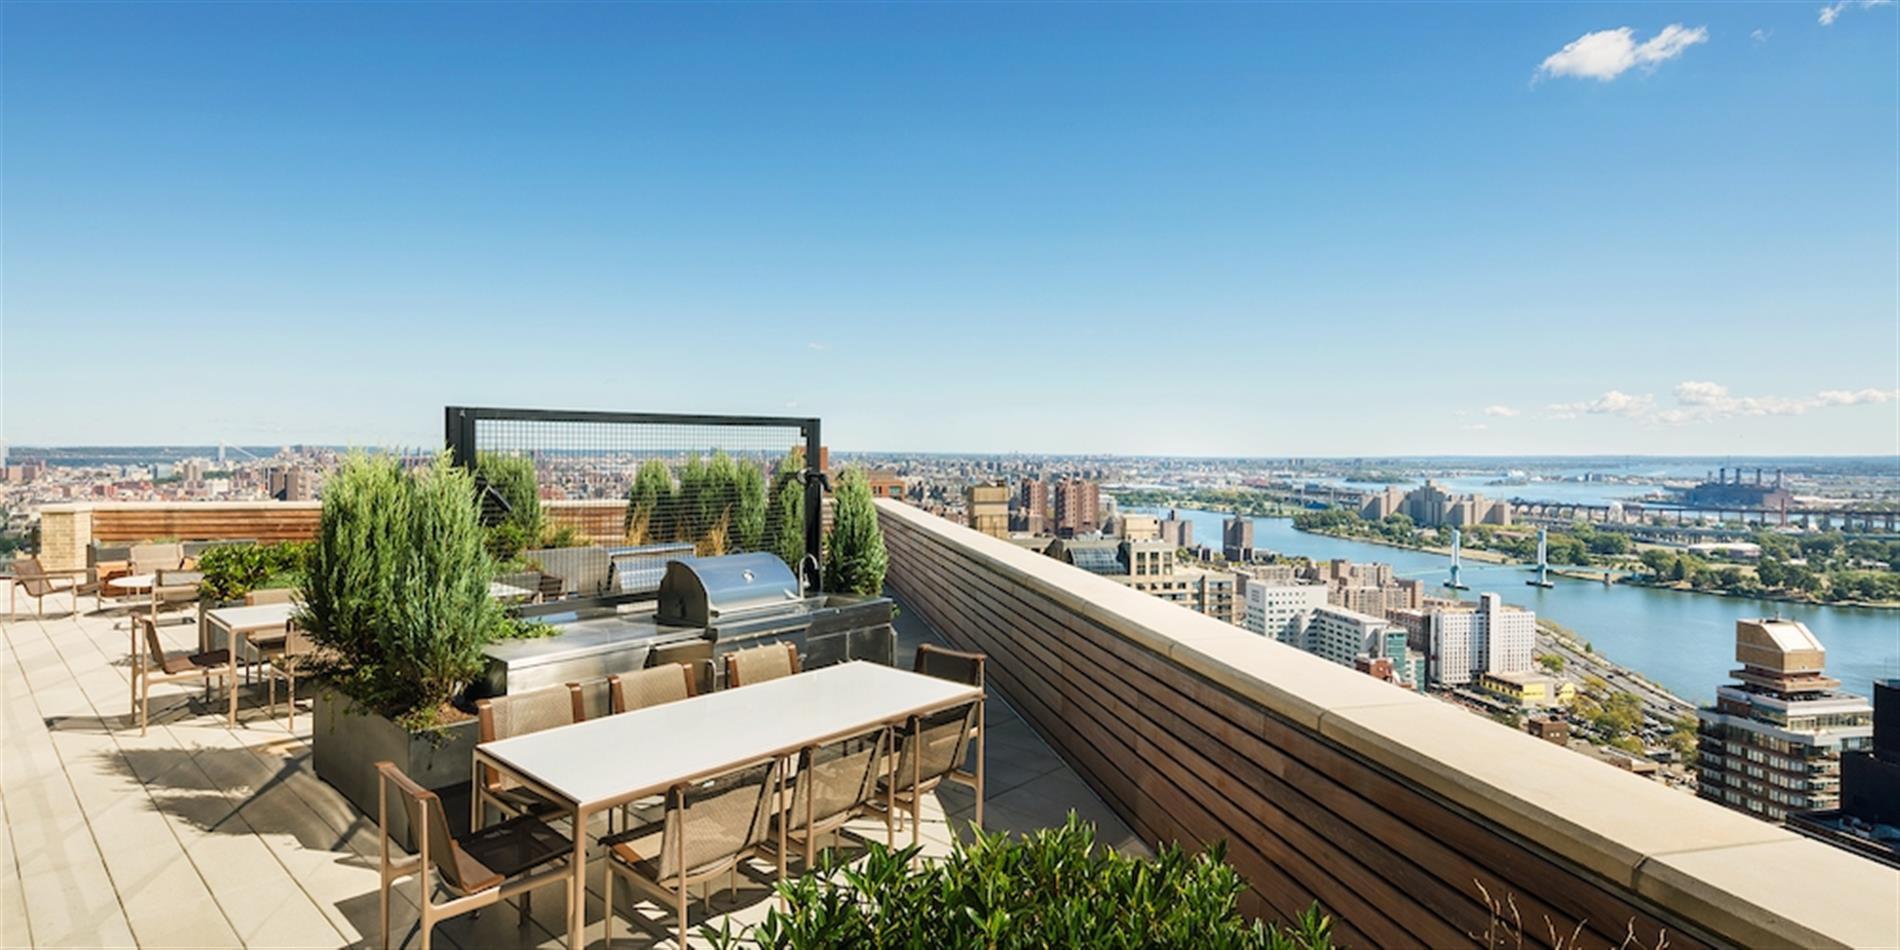 UES 3bd/3.5ba with beautiful city views